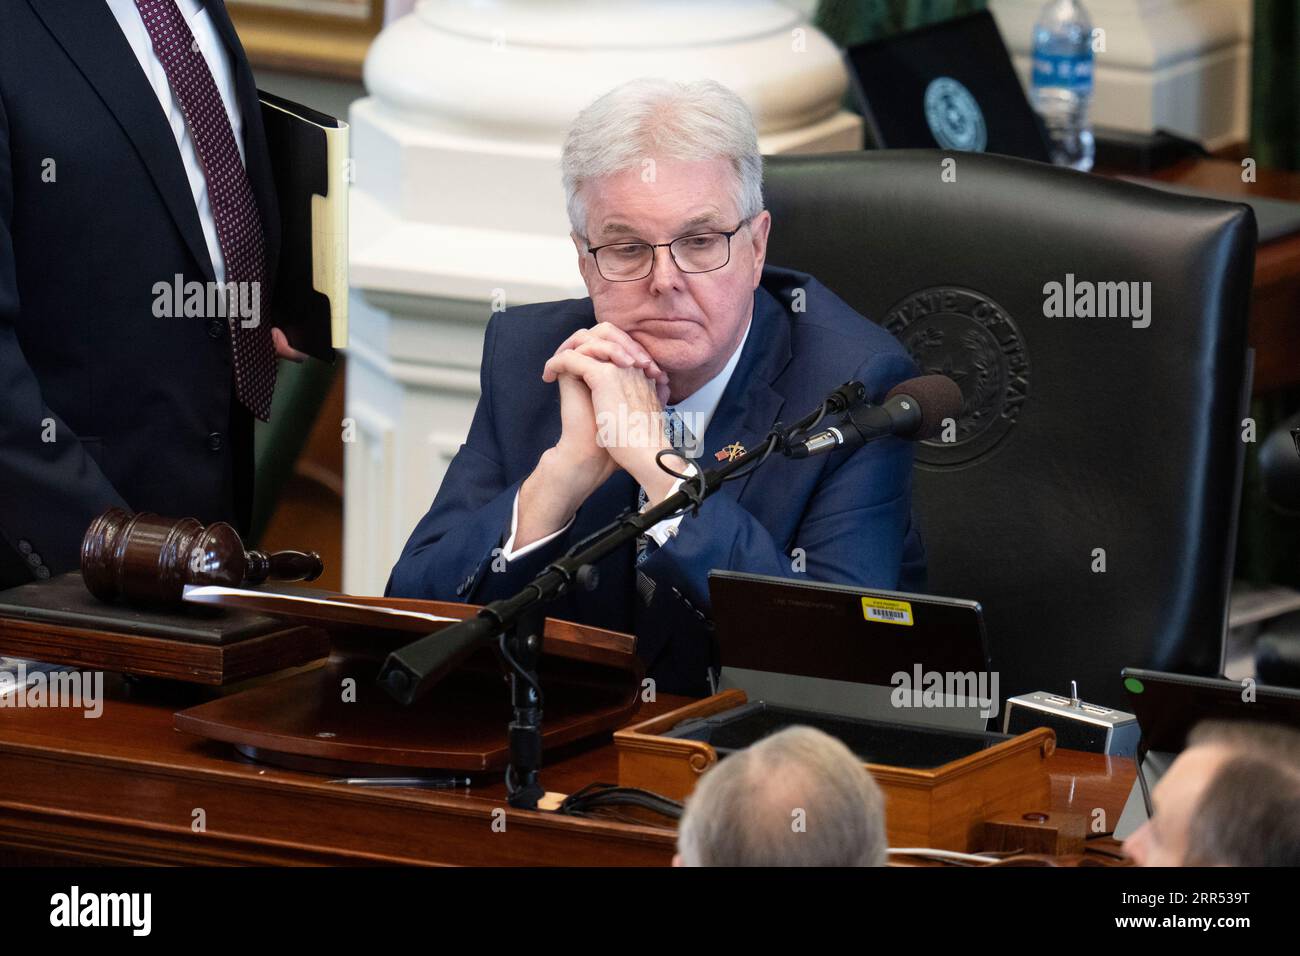 Dan patrick listens to the attorneys during a break in the afternoon session on Day 1 of the Ken Paxton impeachment trial in the Texas Senate. Stock Photo